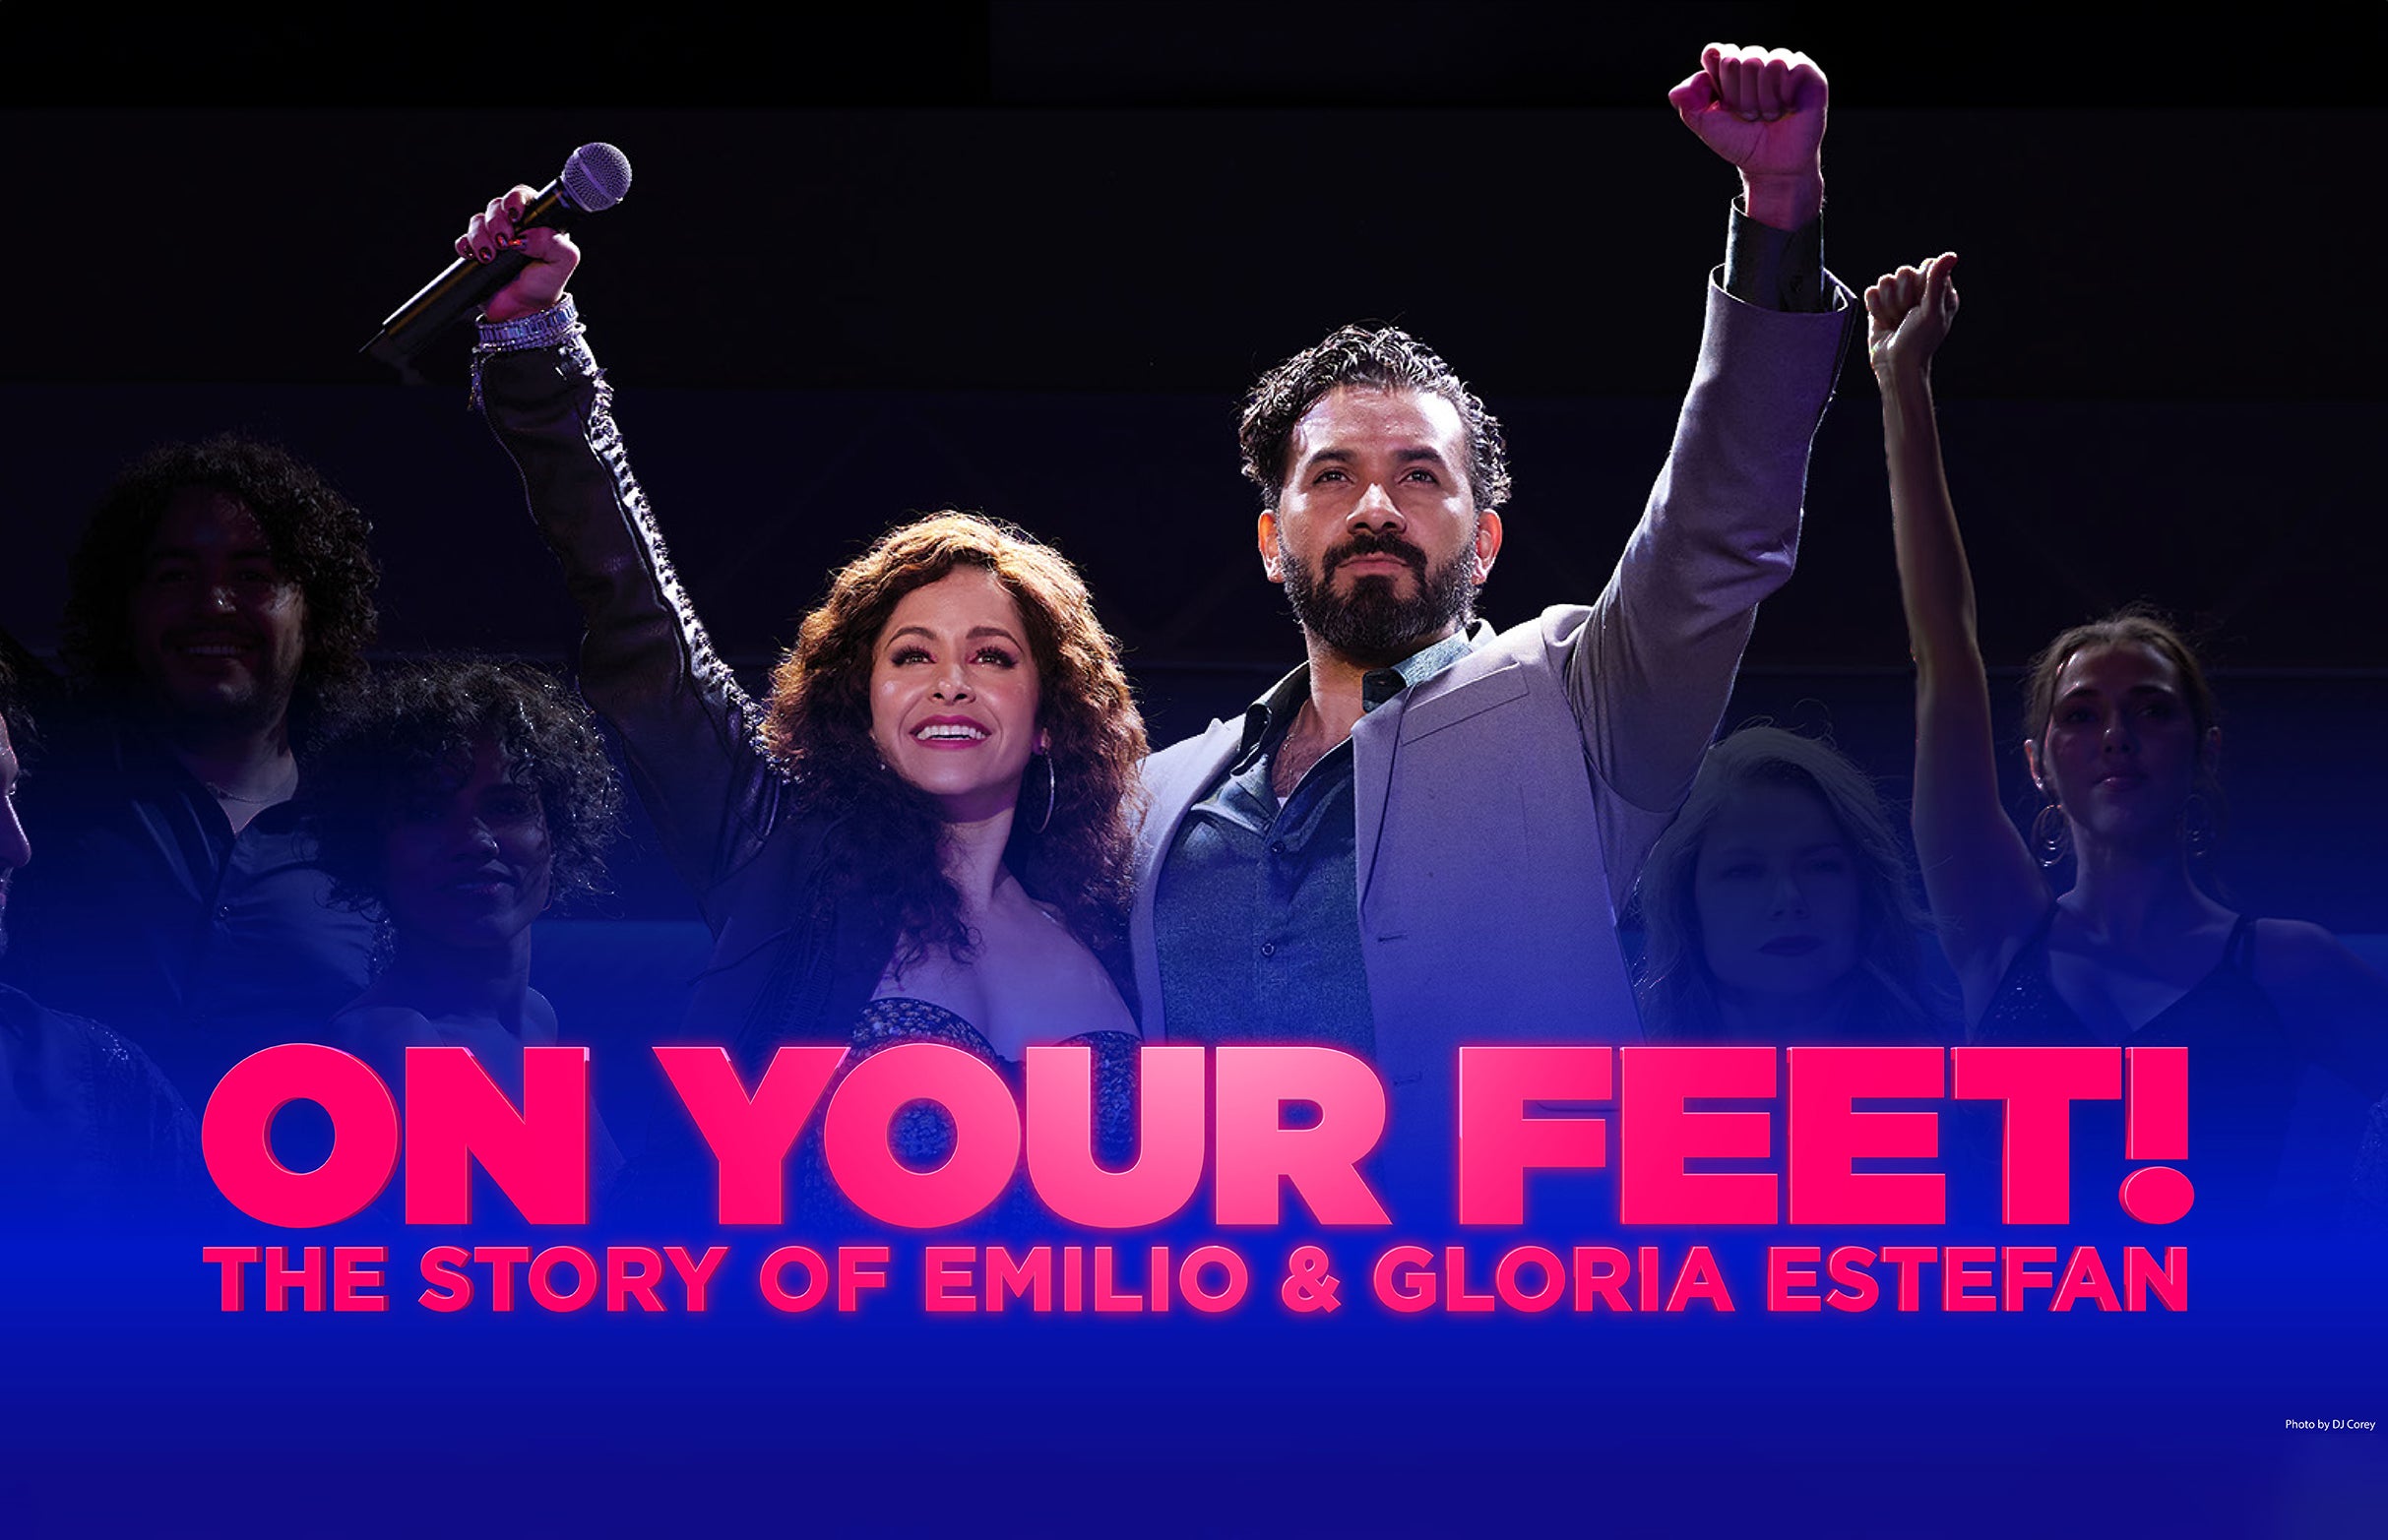 On Your Feet! (Chicago) in Chicago promo photo for Online presale offer code